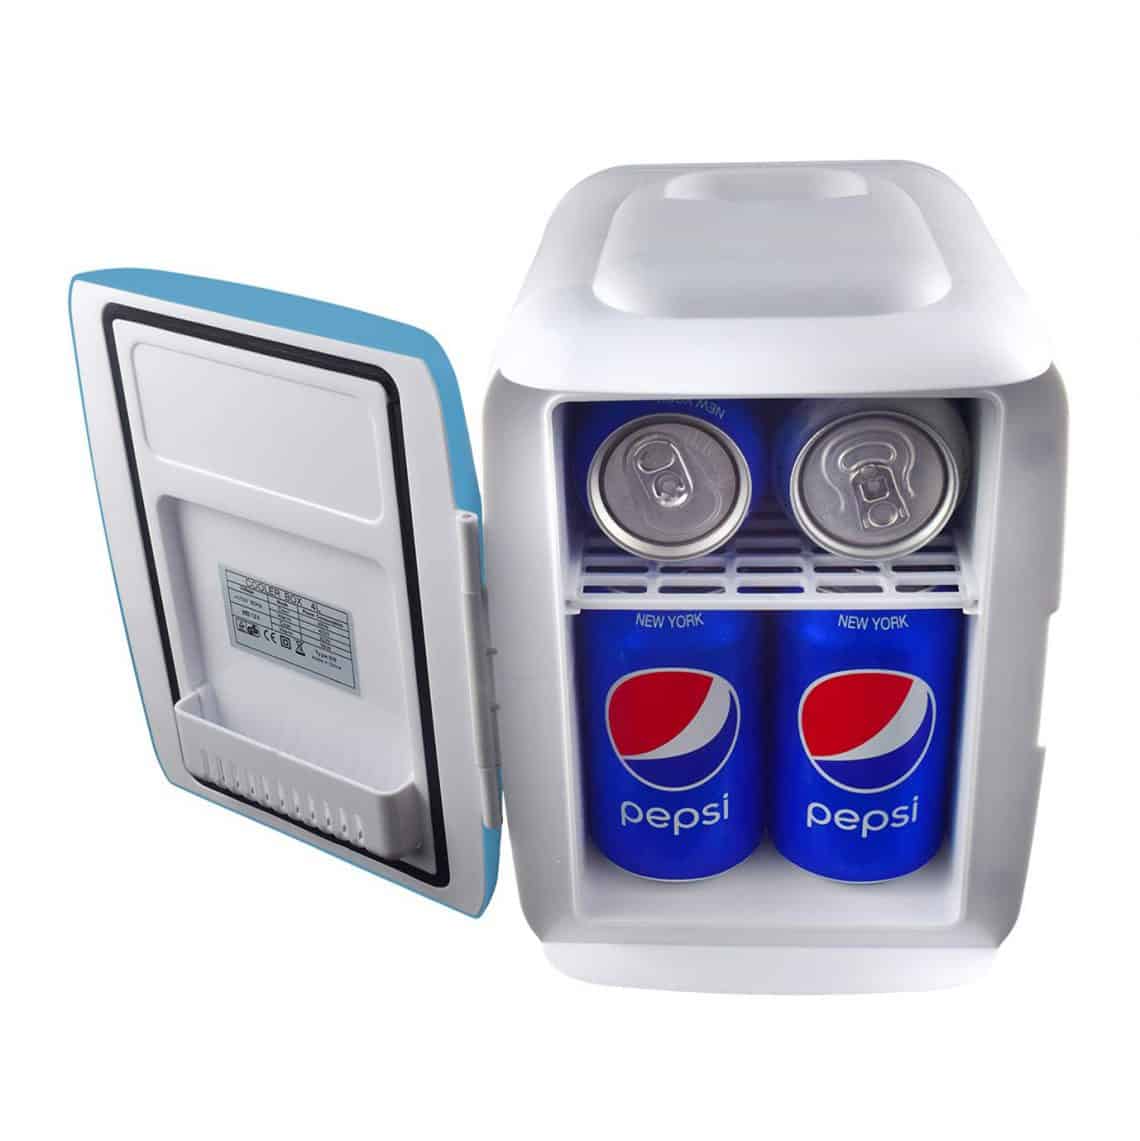 Top 10 Best Mini Fridge Cooler and Warmers in 2022 - Buyer's Guide